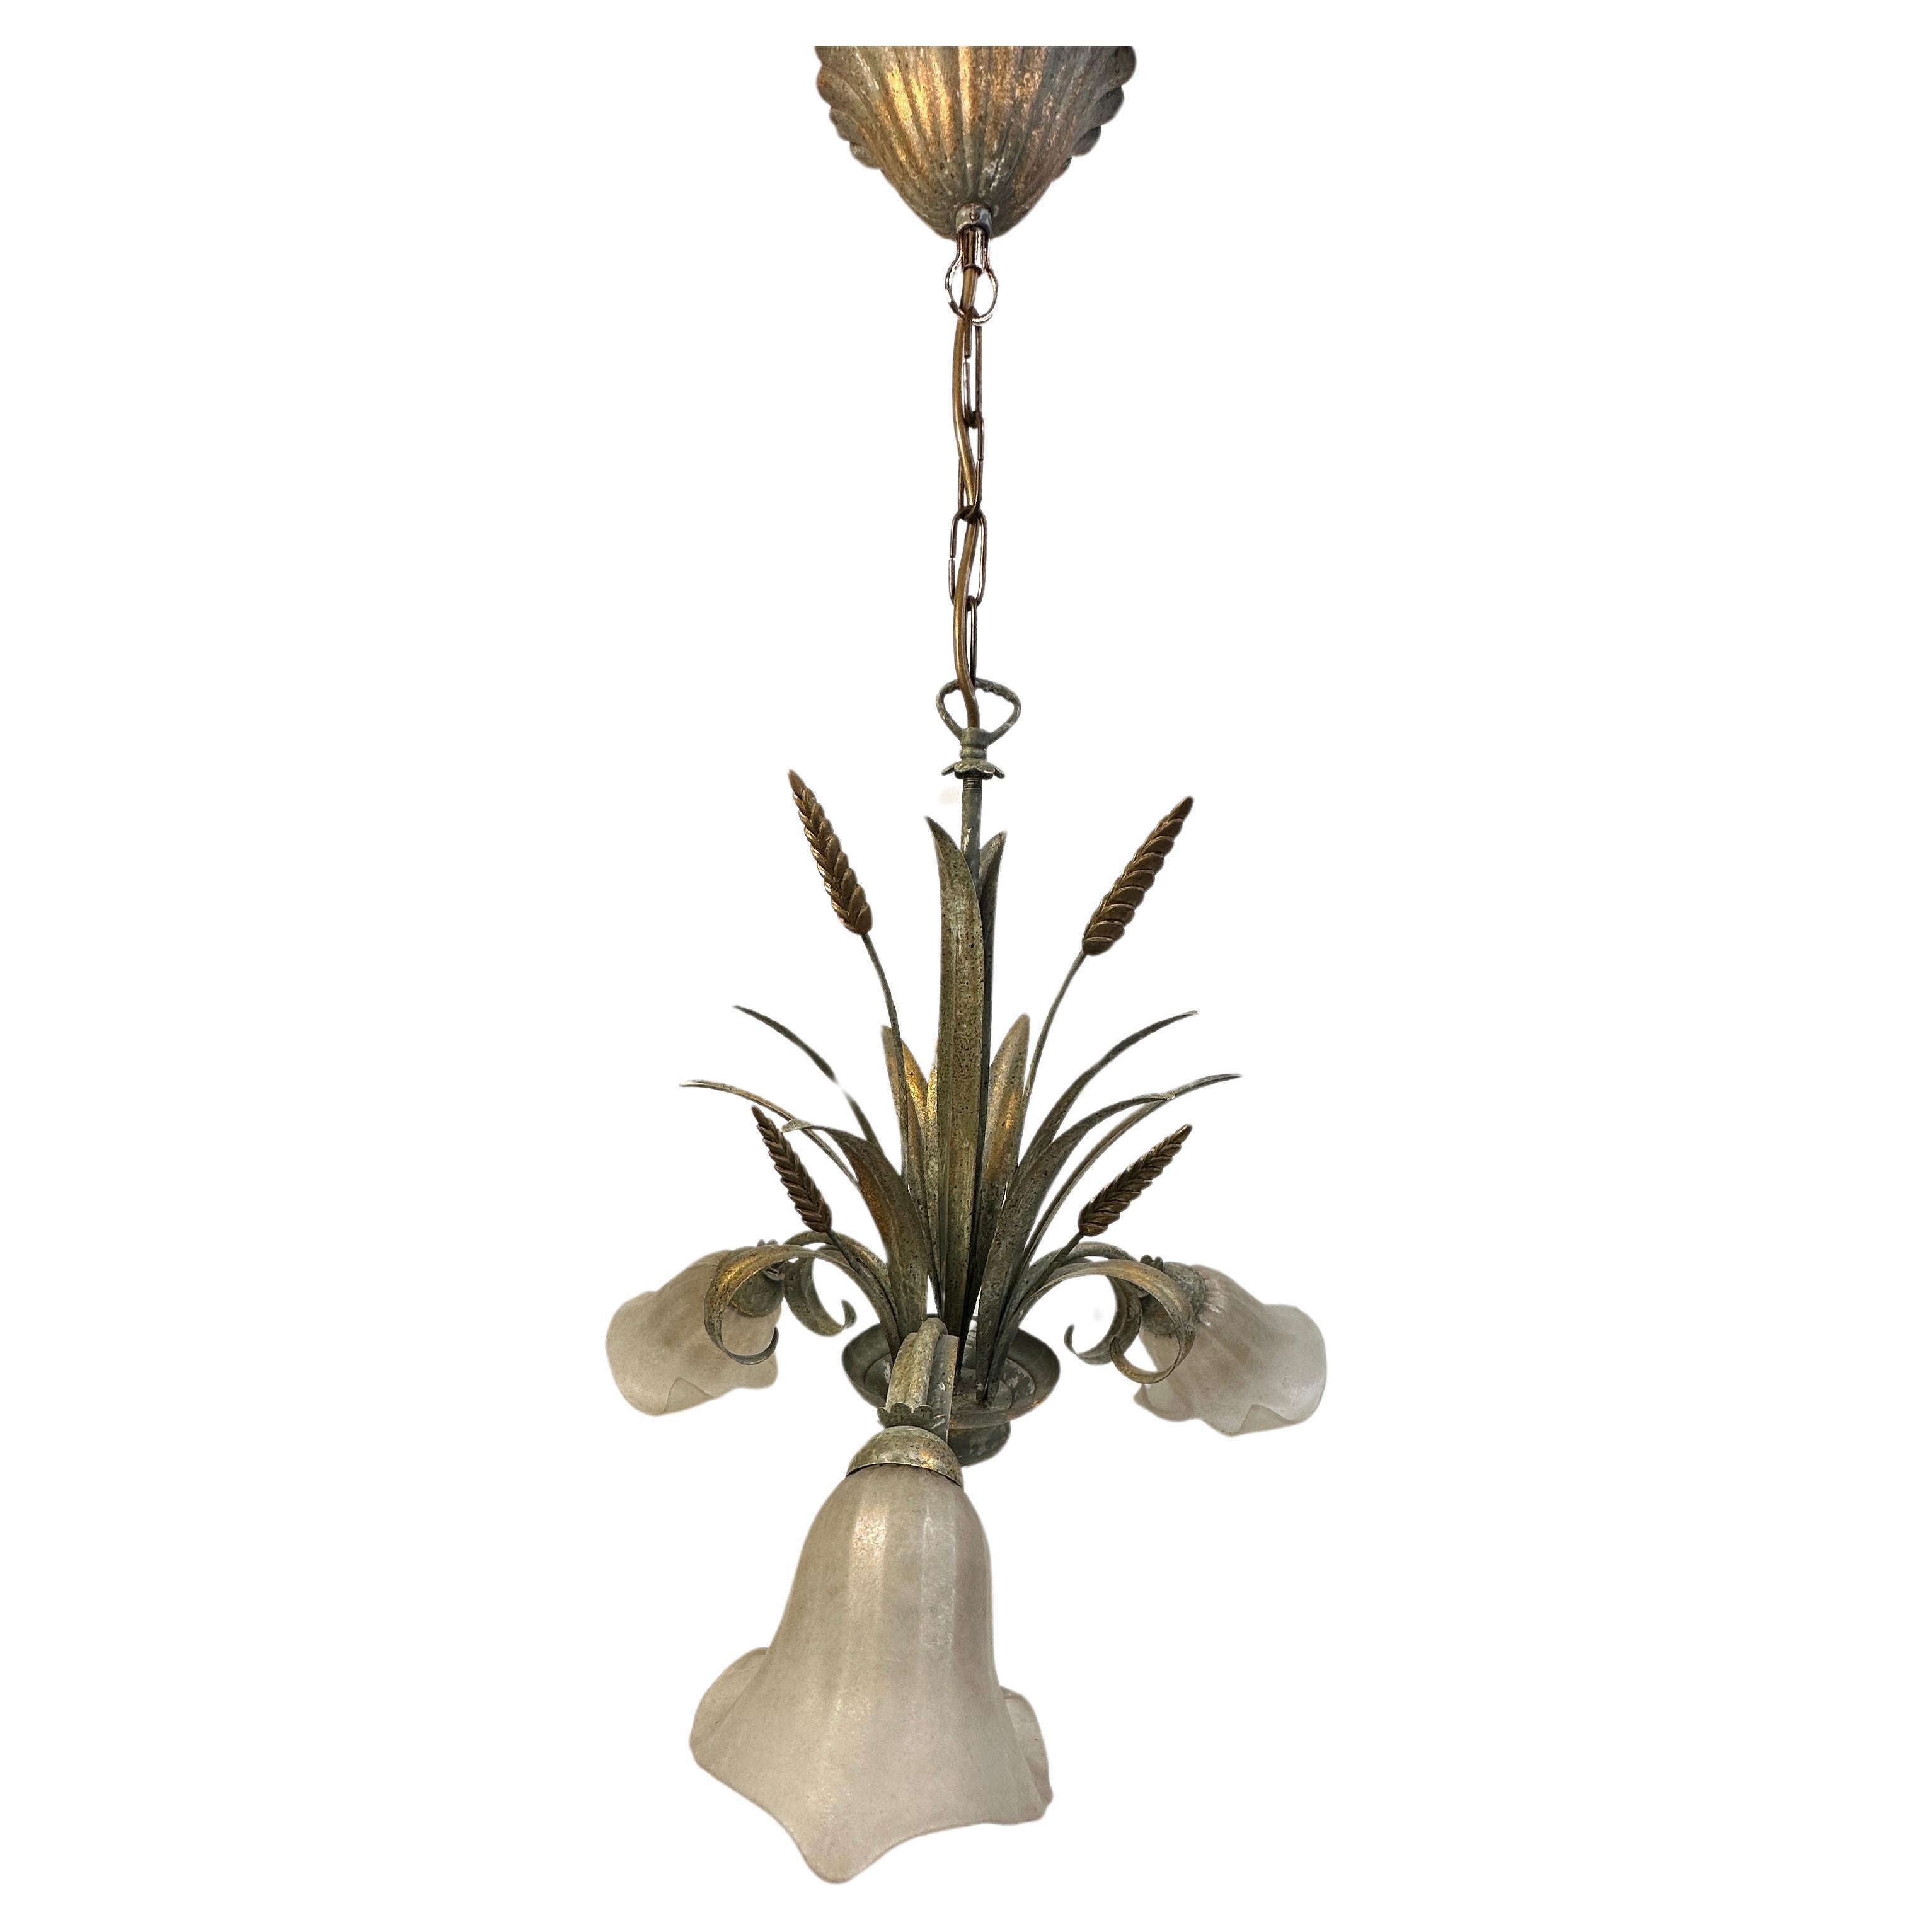 Mid-20th Century Metal & Glass Shade Wheat Sheaf Chandelier Tole Toleware Coco Chanel Style For Sale